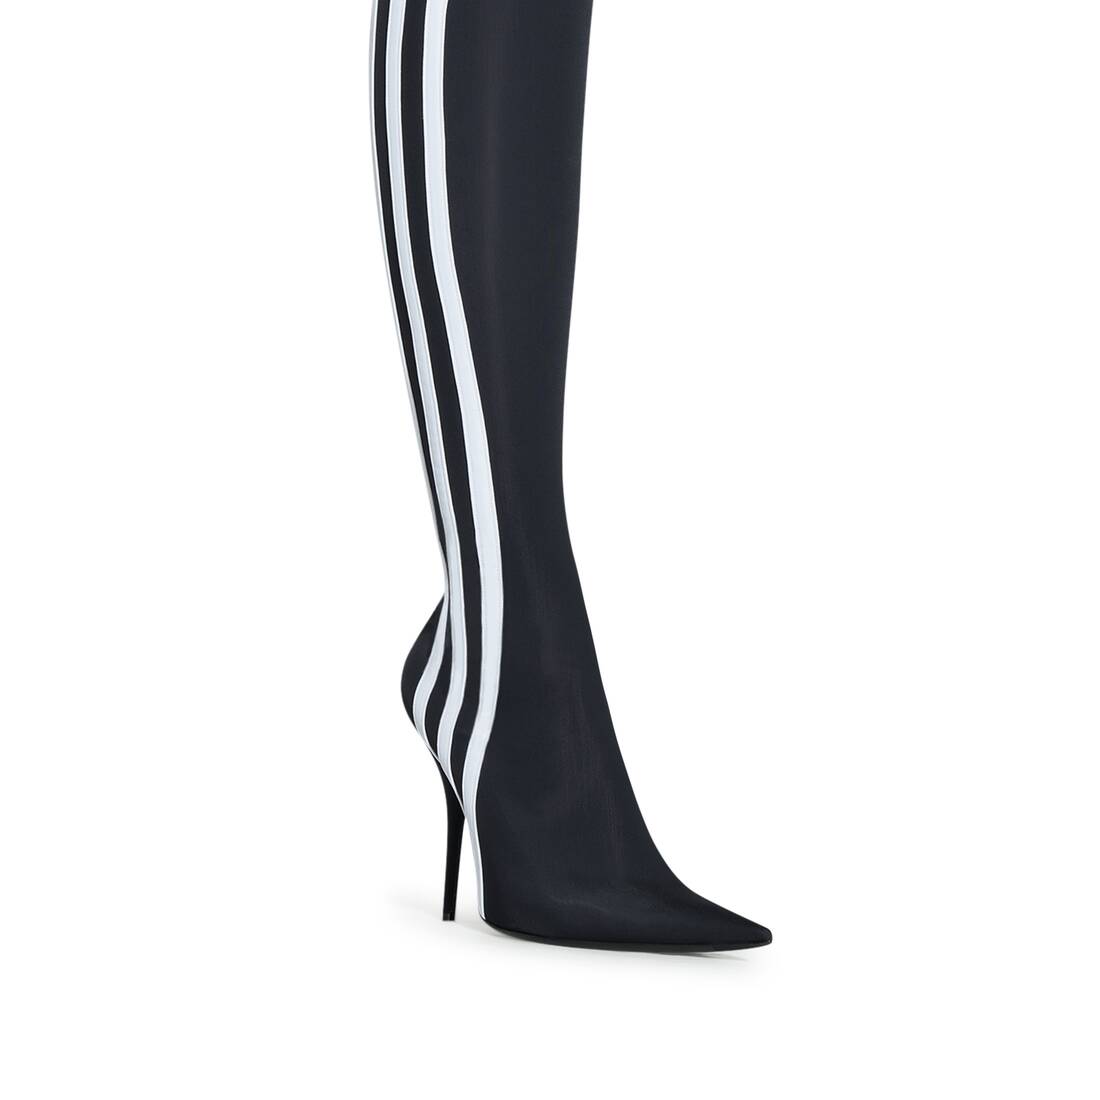 Women's Balenciaga / Adidas Knife 110mm Over-the-knee Boot in Black